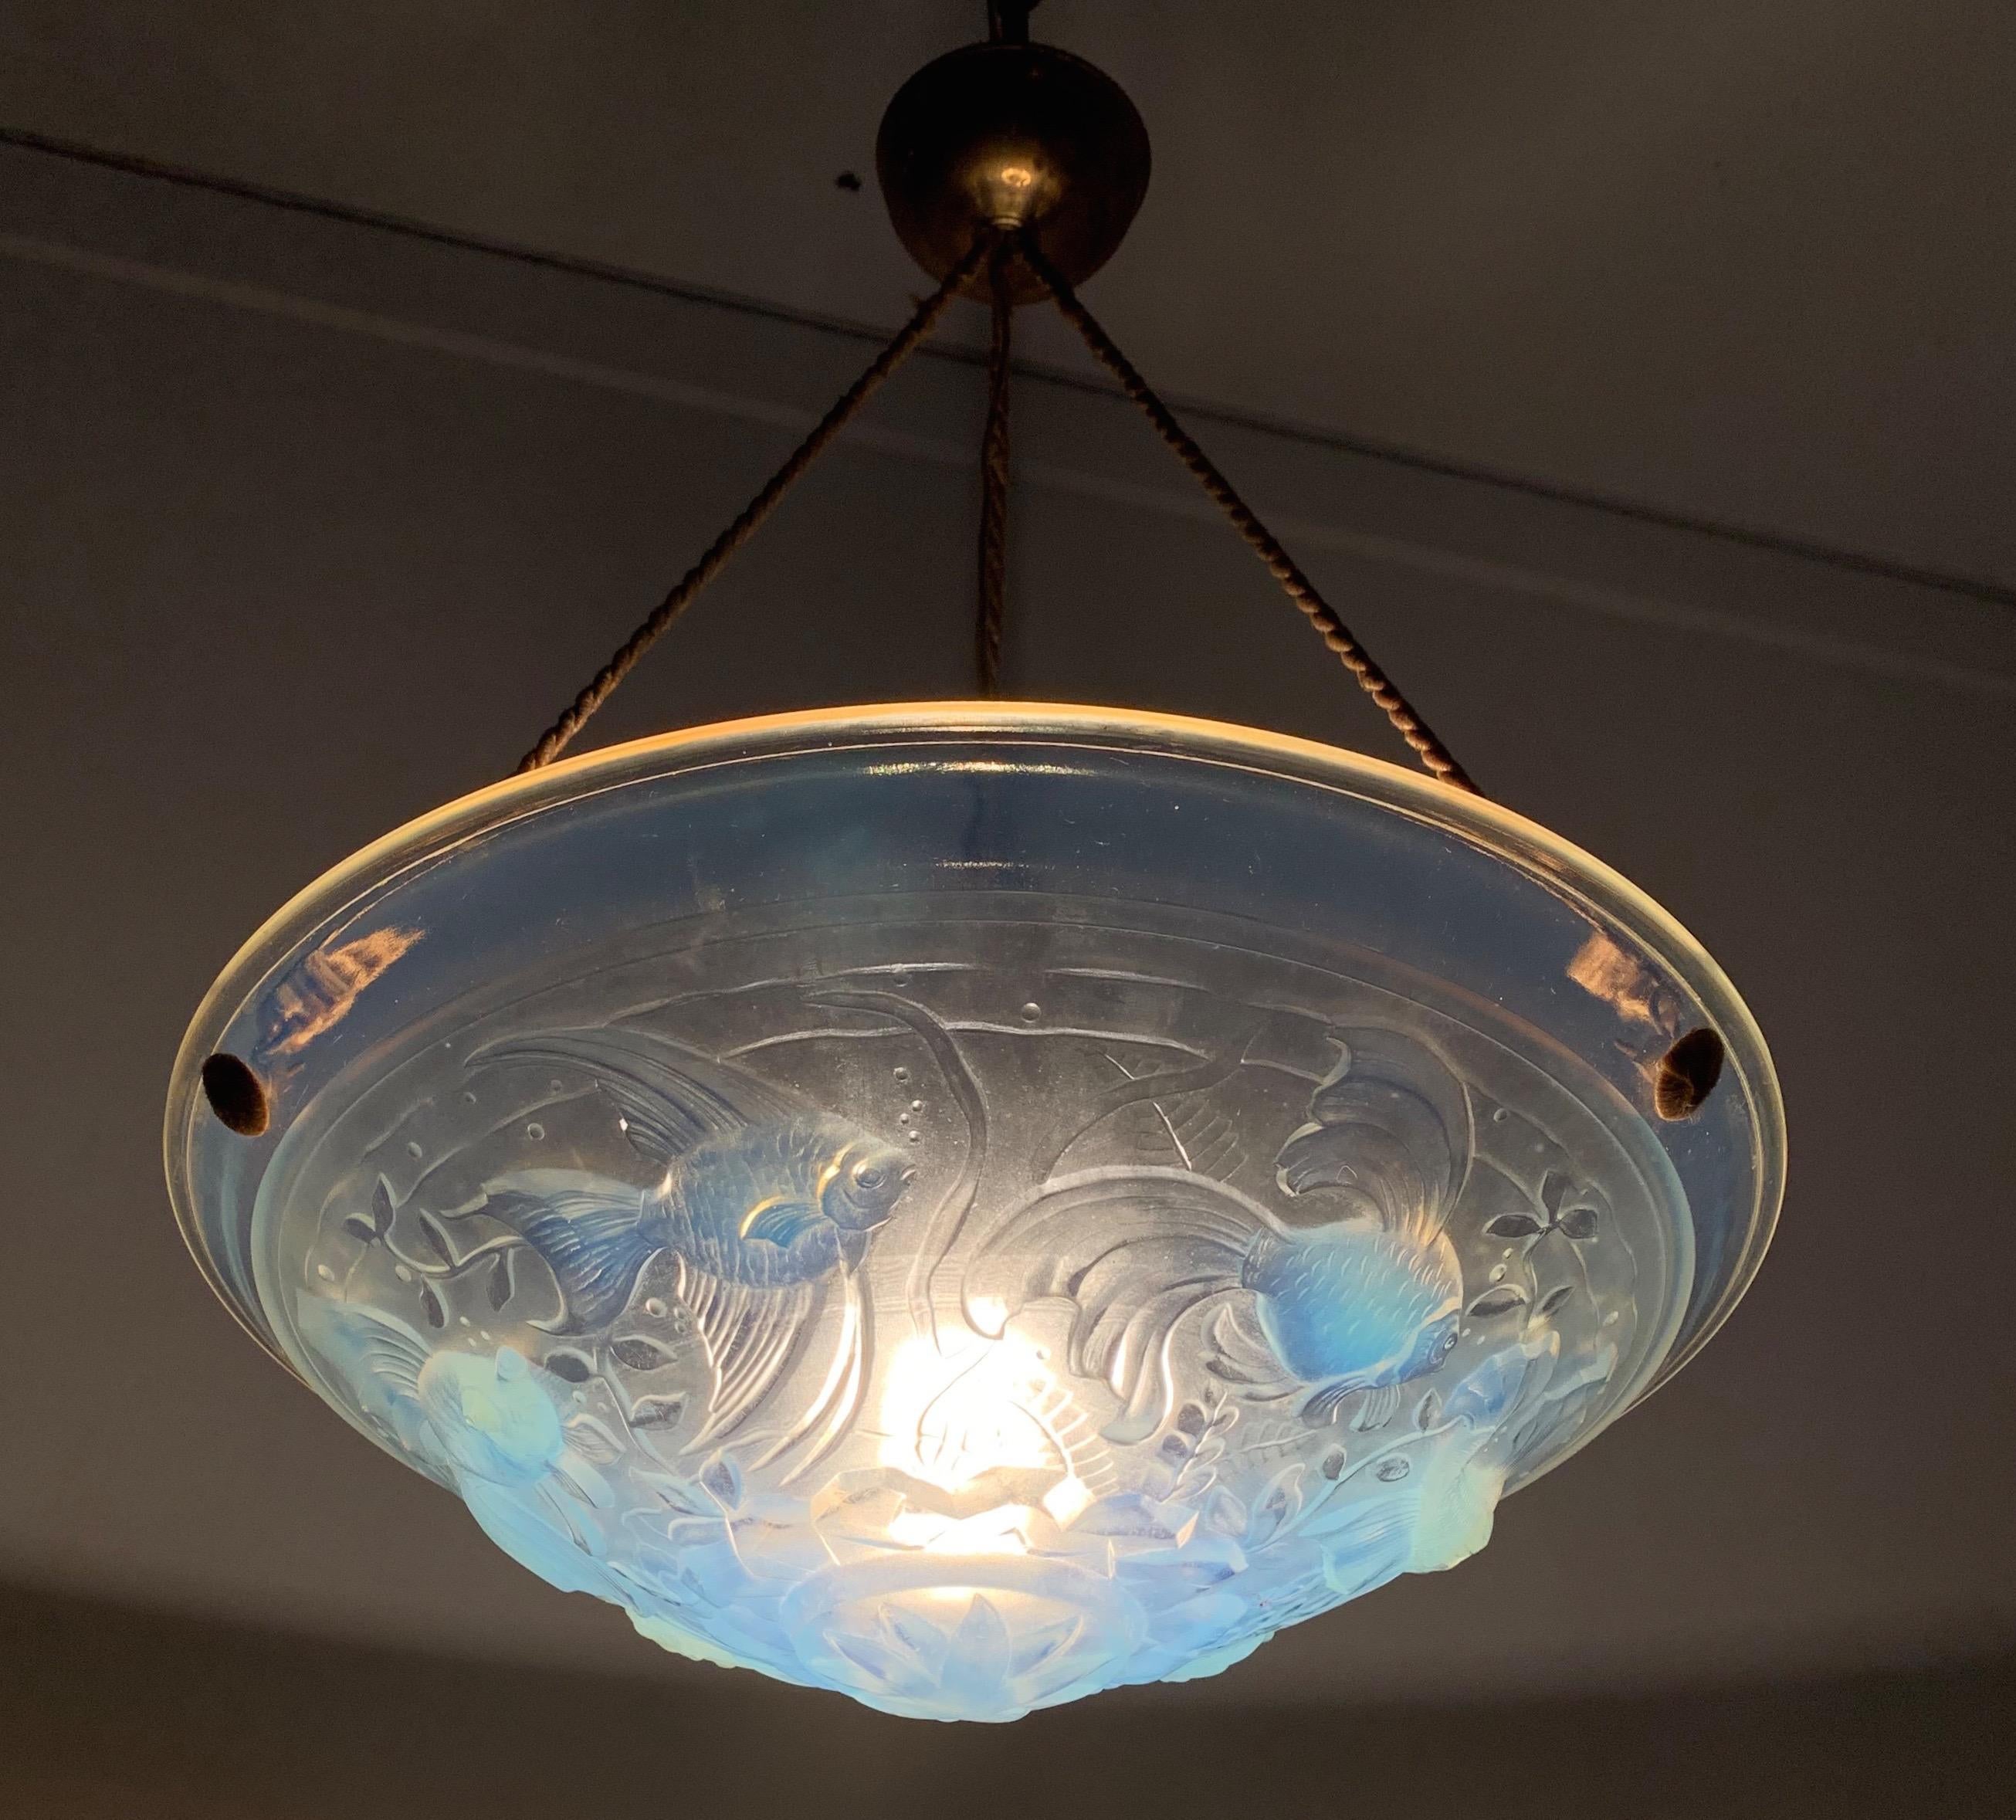 Very stylish and rare, 1920s Art Deco pendant light with a beautiful color.

When we first saw this rare, practical size and highly decorative Art Deco pendant we immediately knew it had to become ours. The wonderful design and shape immediately